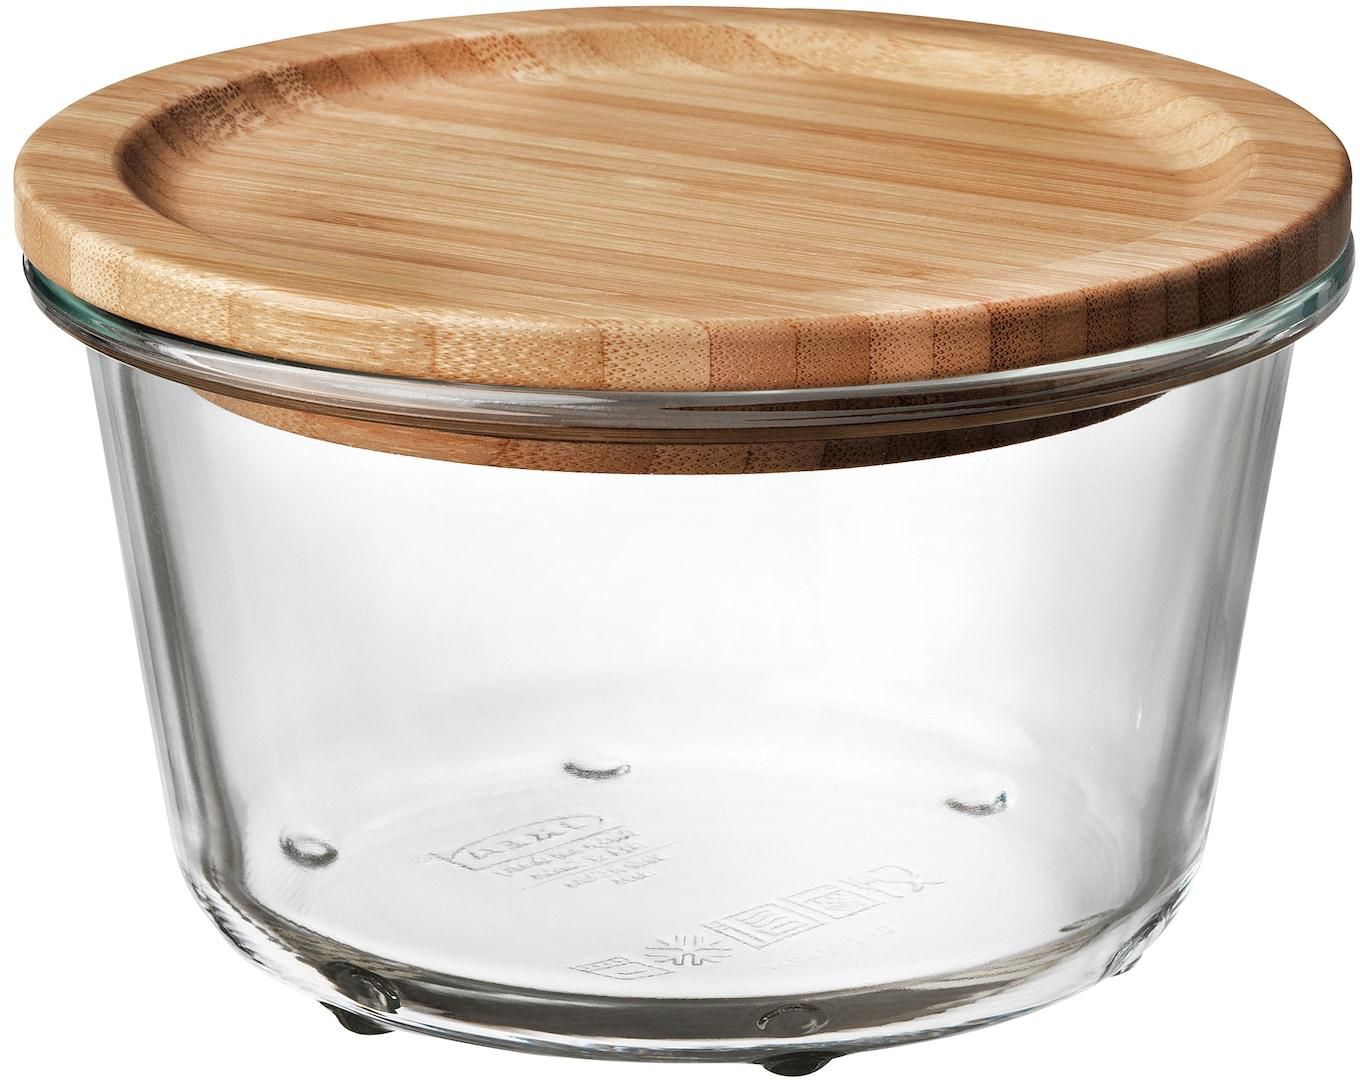 IKEA 365+ Food container with lid - round glass/bamboo 600 ml